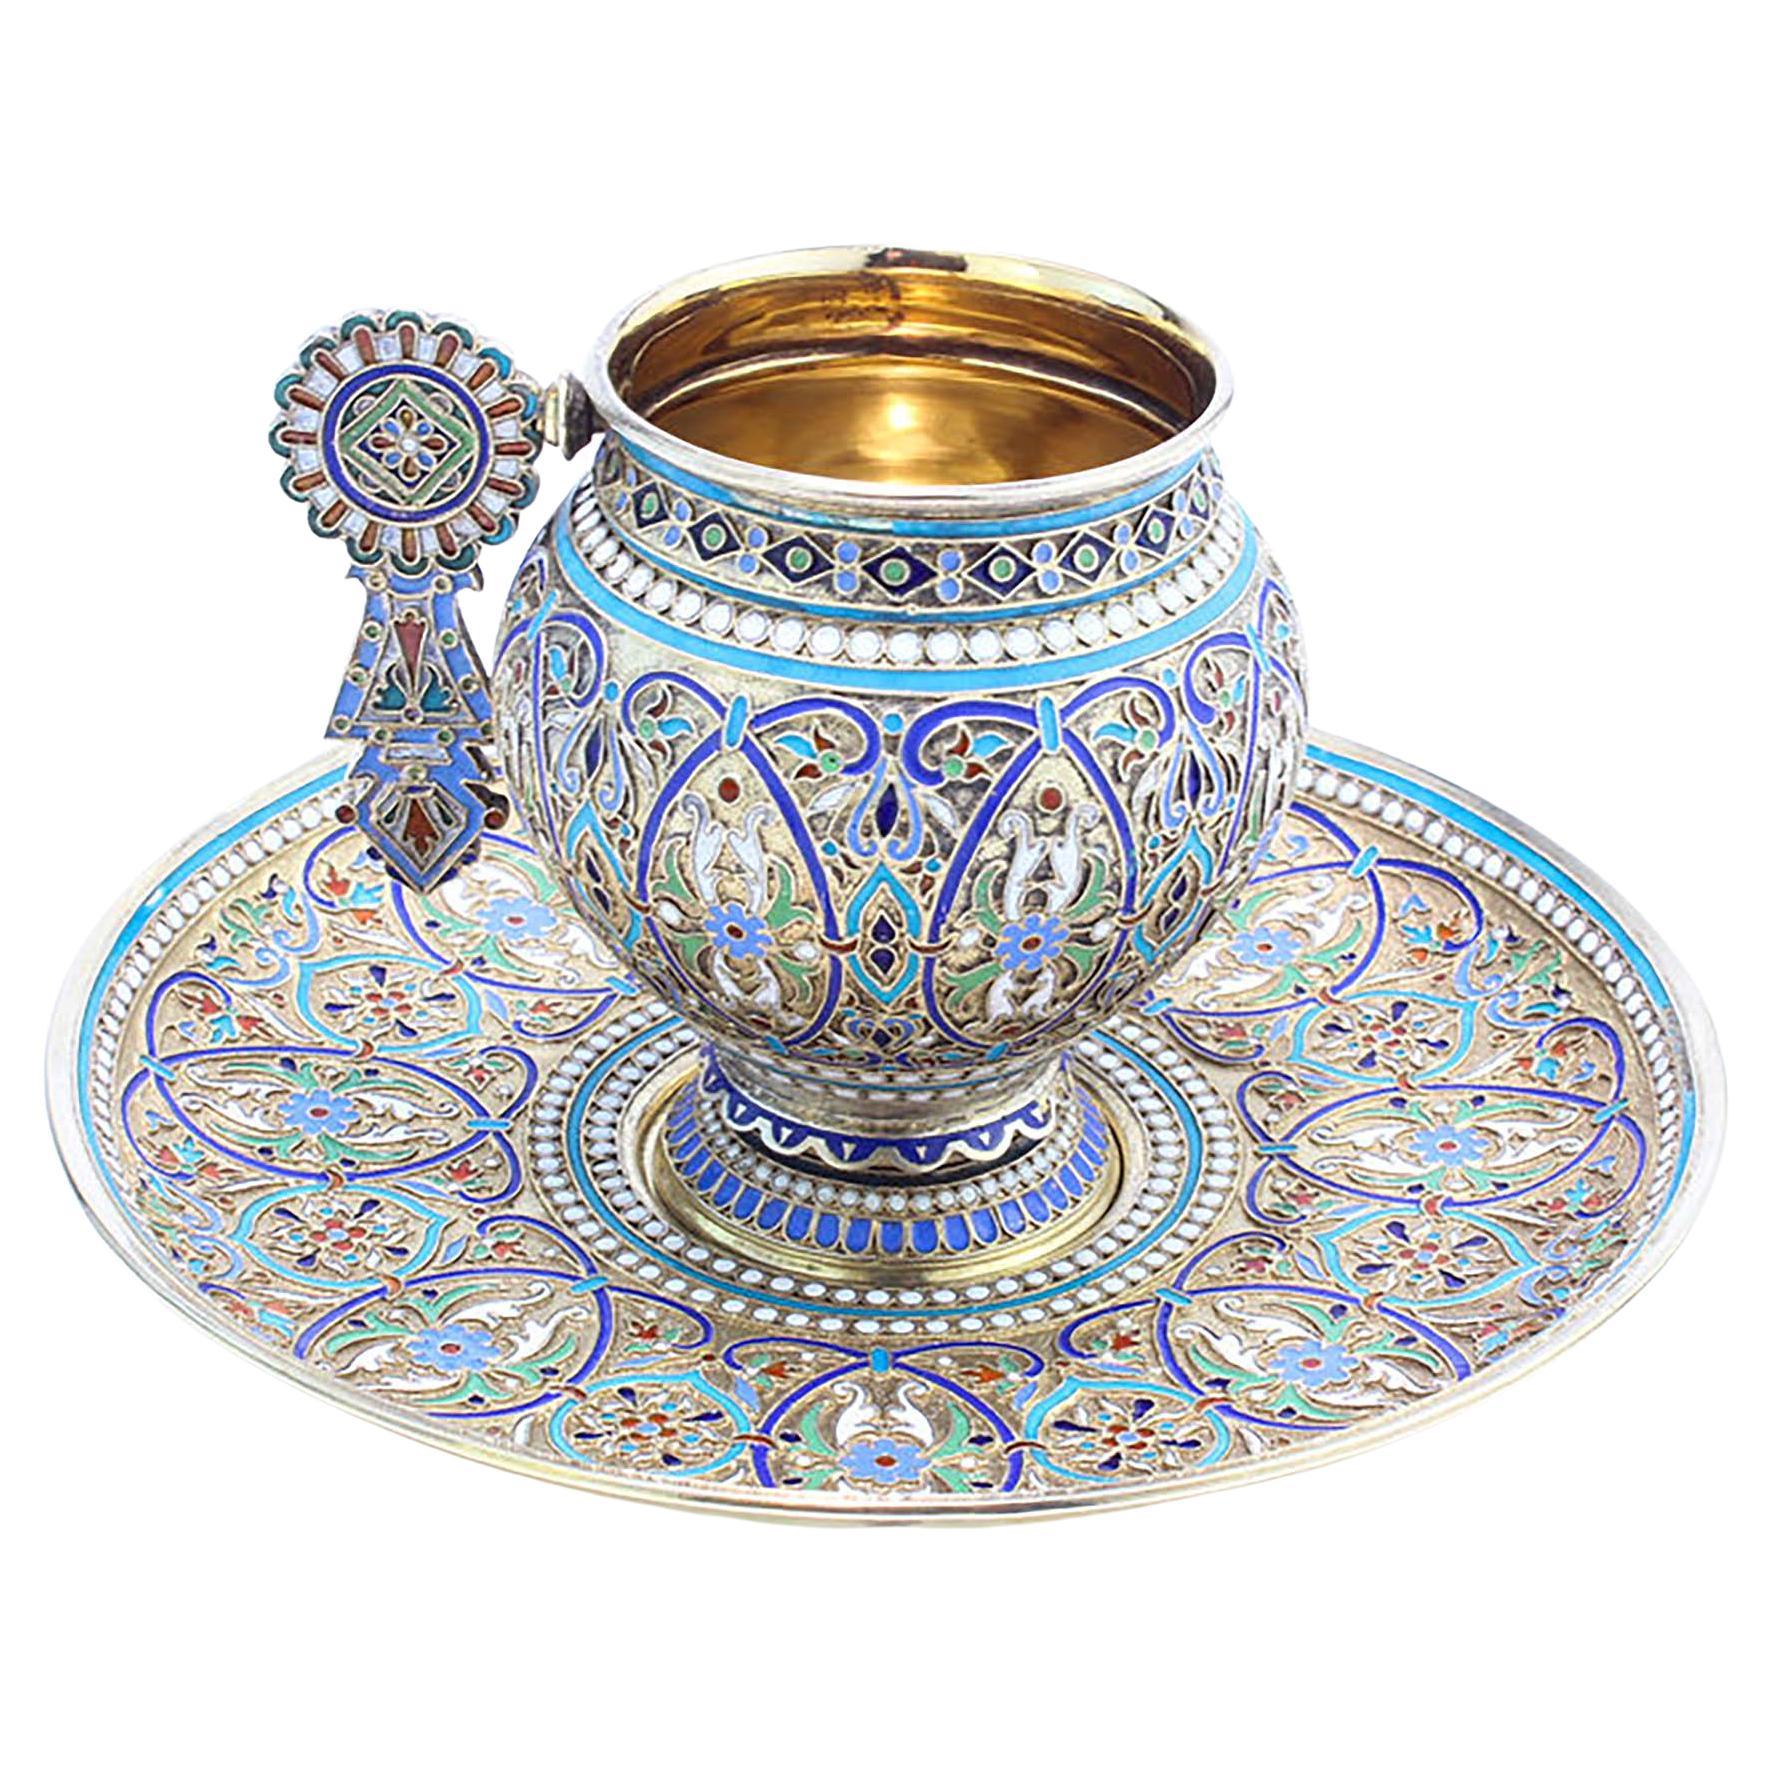 Russian Silver and Enamel Cup and Saucer